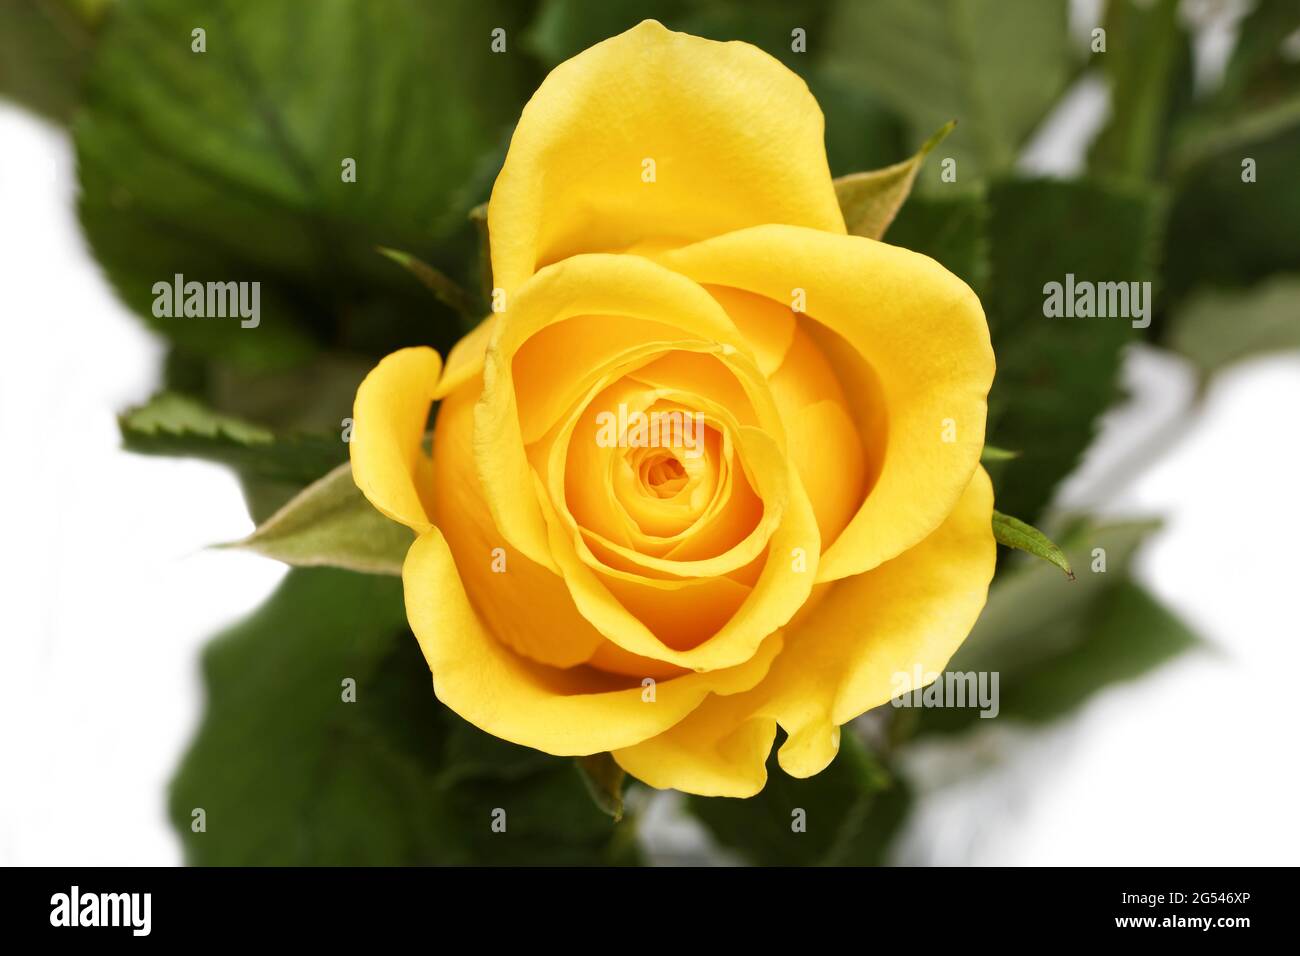 Single bud of yellow rose with green leaves on a white background. Shallow focus. Top view. Stock Photo